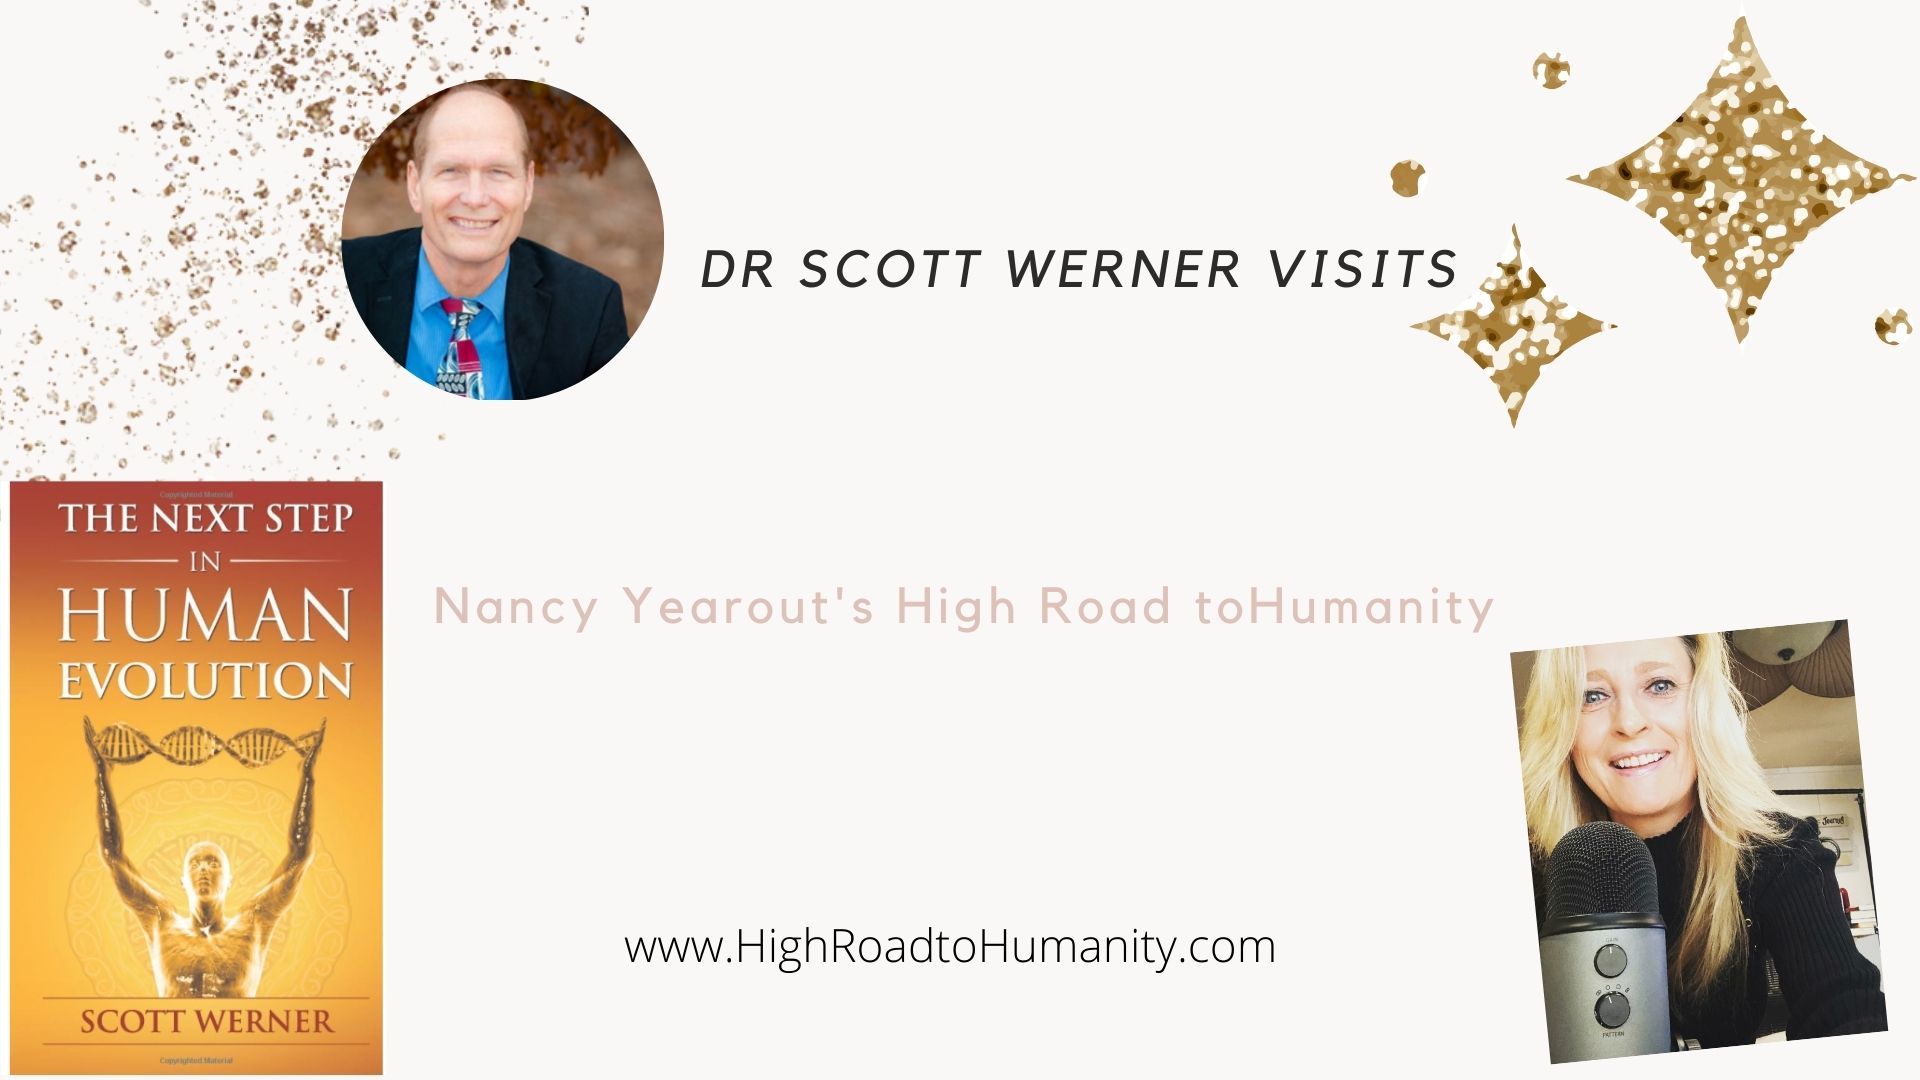 Dr Scott Werner with Higher Dimensional Sight, Shares Decrees for Ascension and Healing on High Road